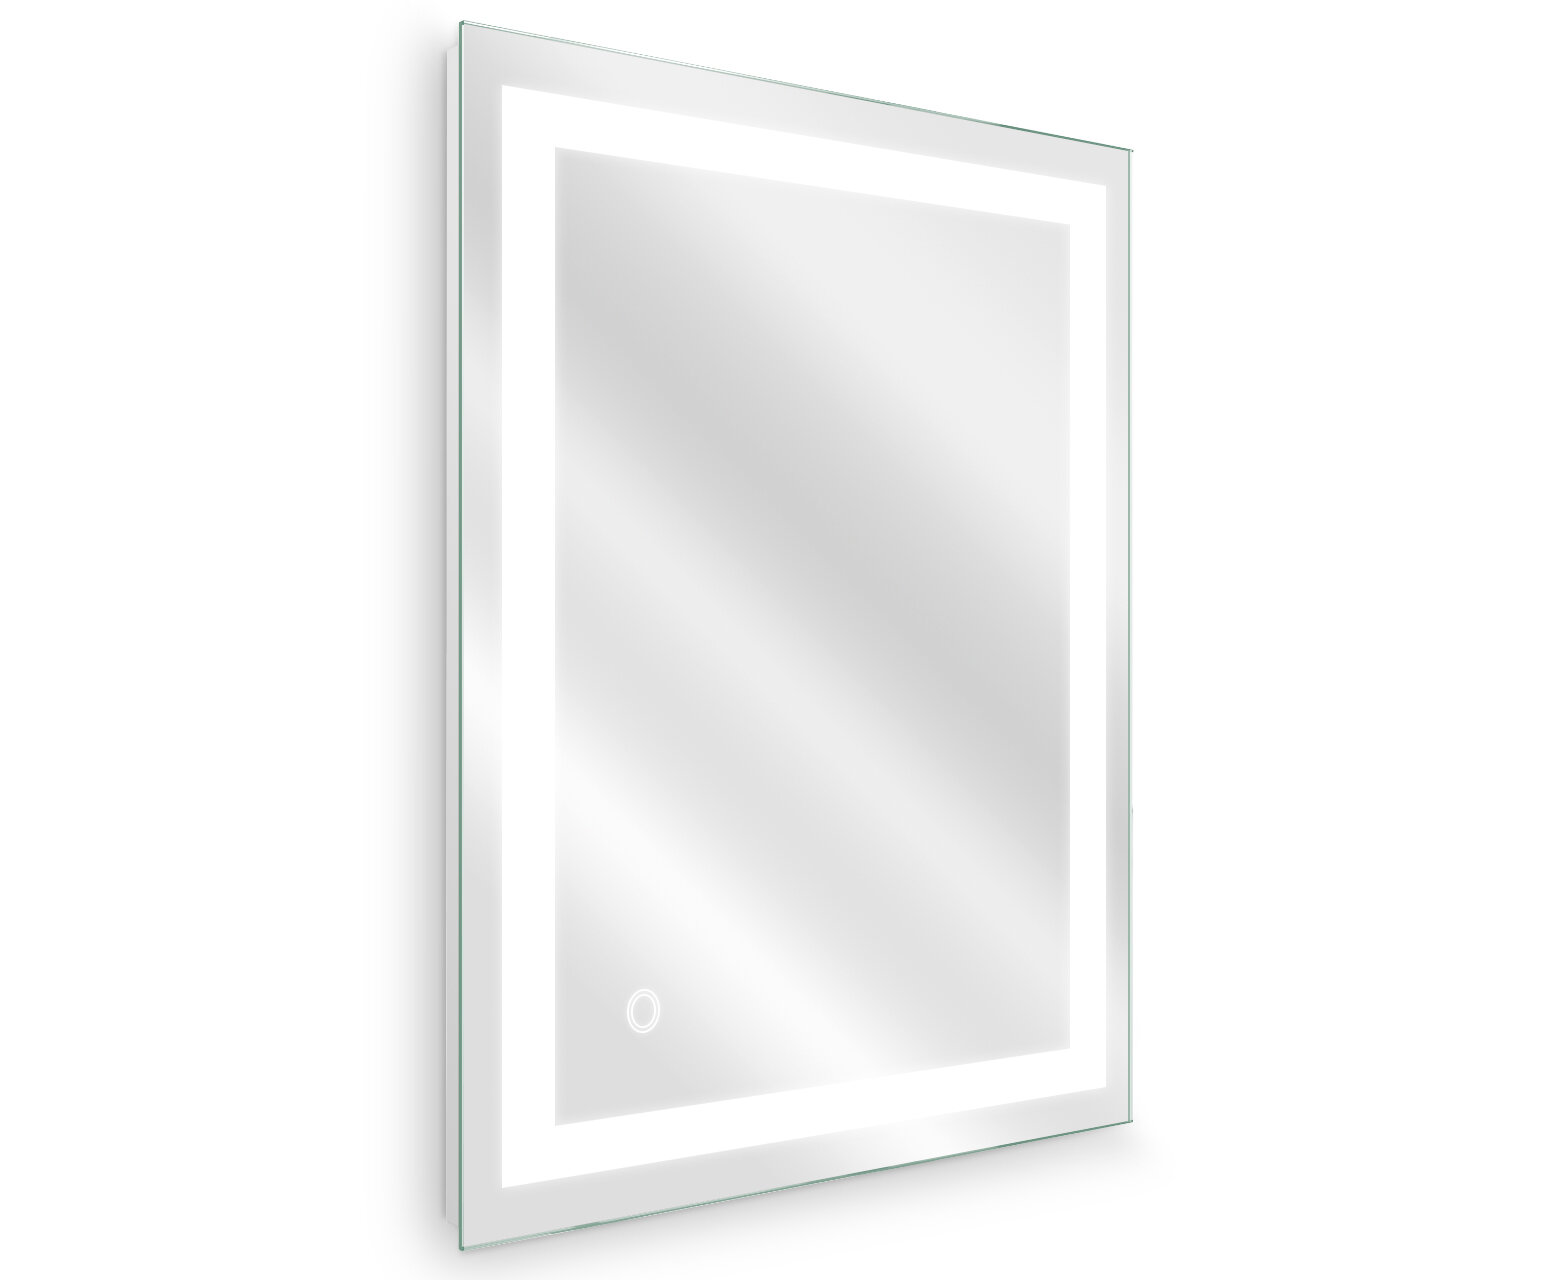 Slang 32x40 inch LED Mirrors for Bathroom Wall Mounted Mirror Anti Fog Dimmable Memory Makeup Mirror Touch Button Adjust Light Brightness Horizontally/Vertically+IP54 Waterproof High Lumen+CRI 95 